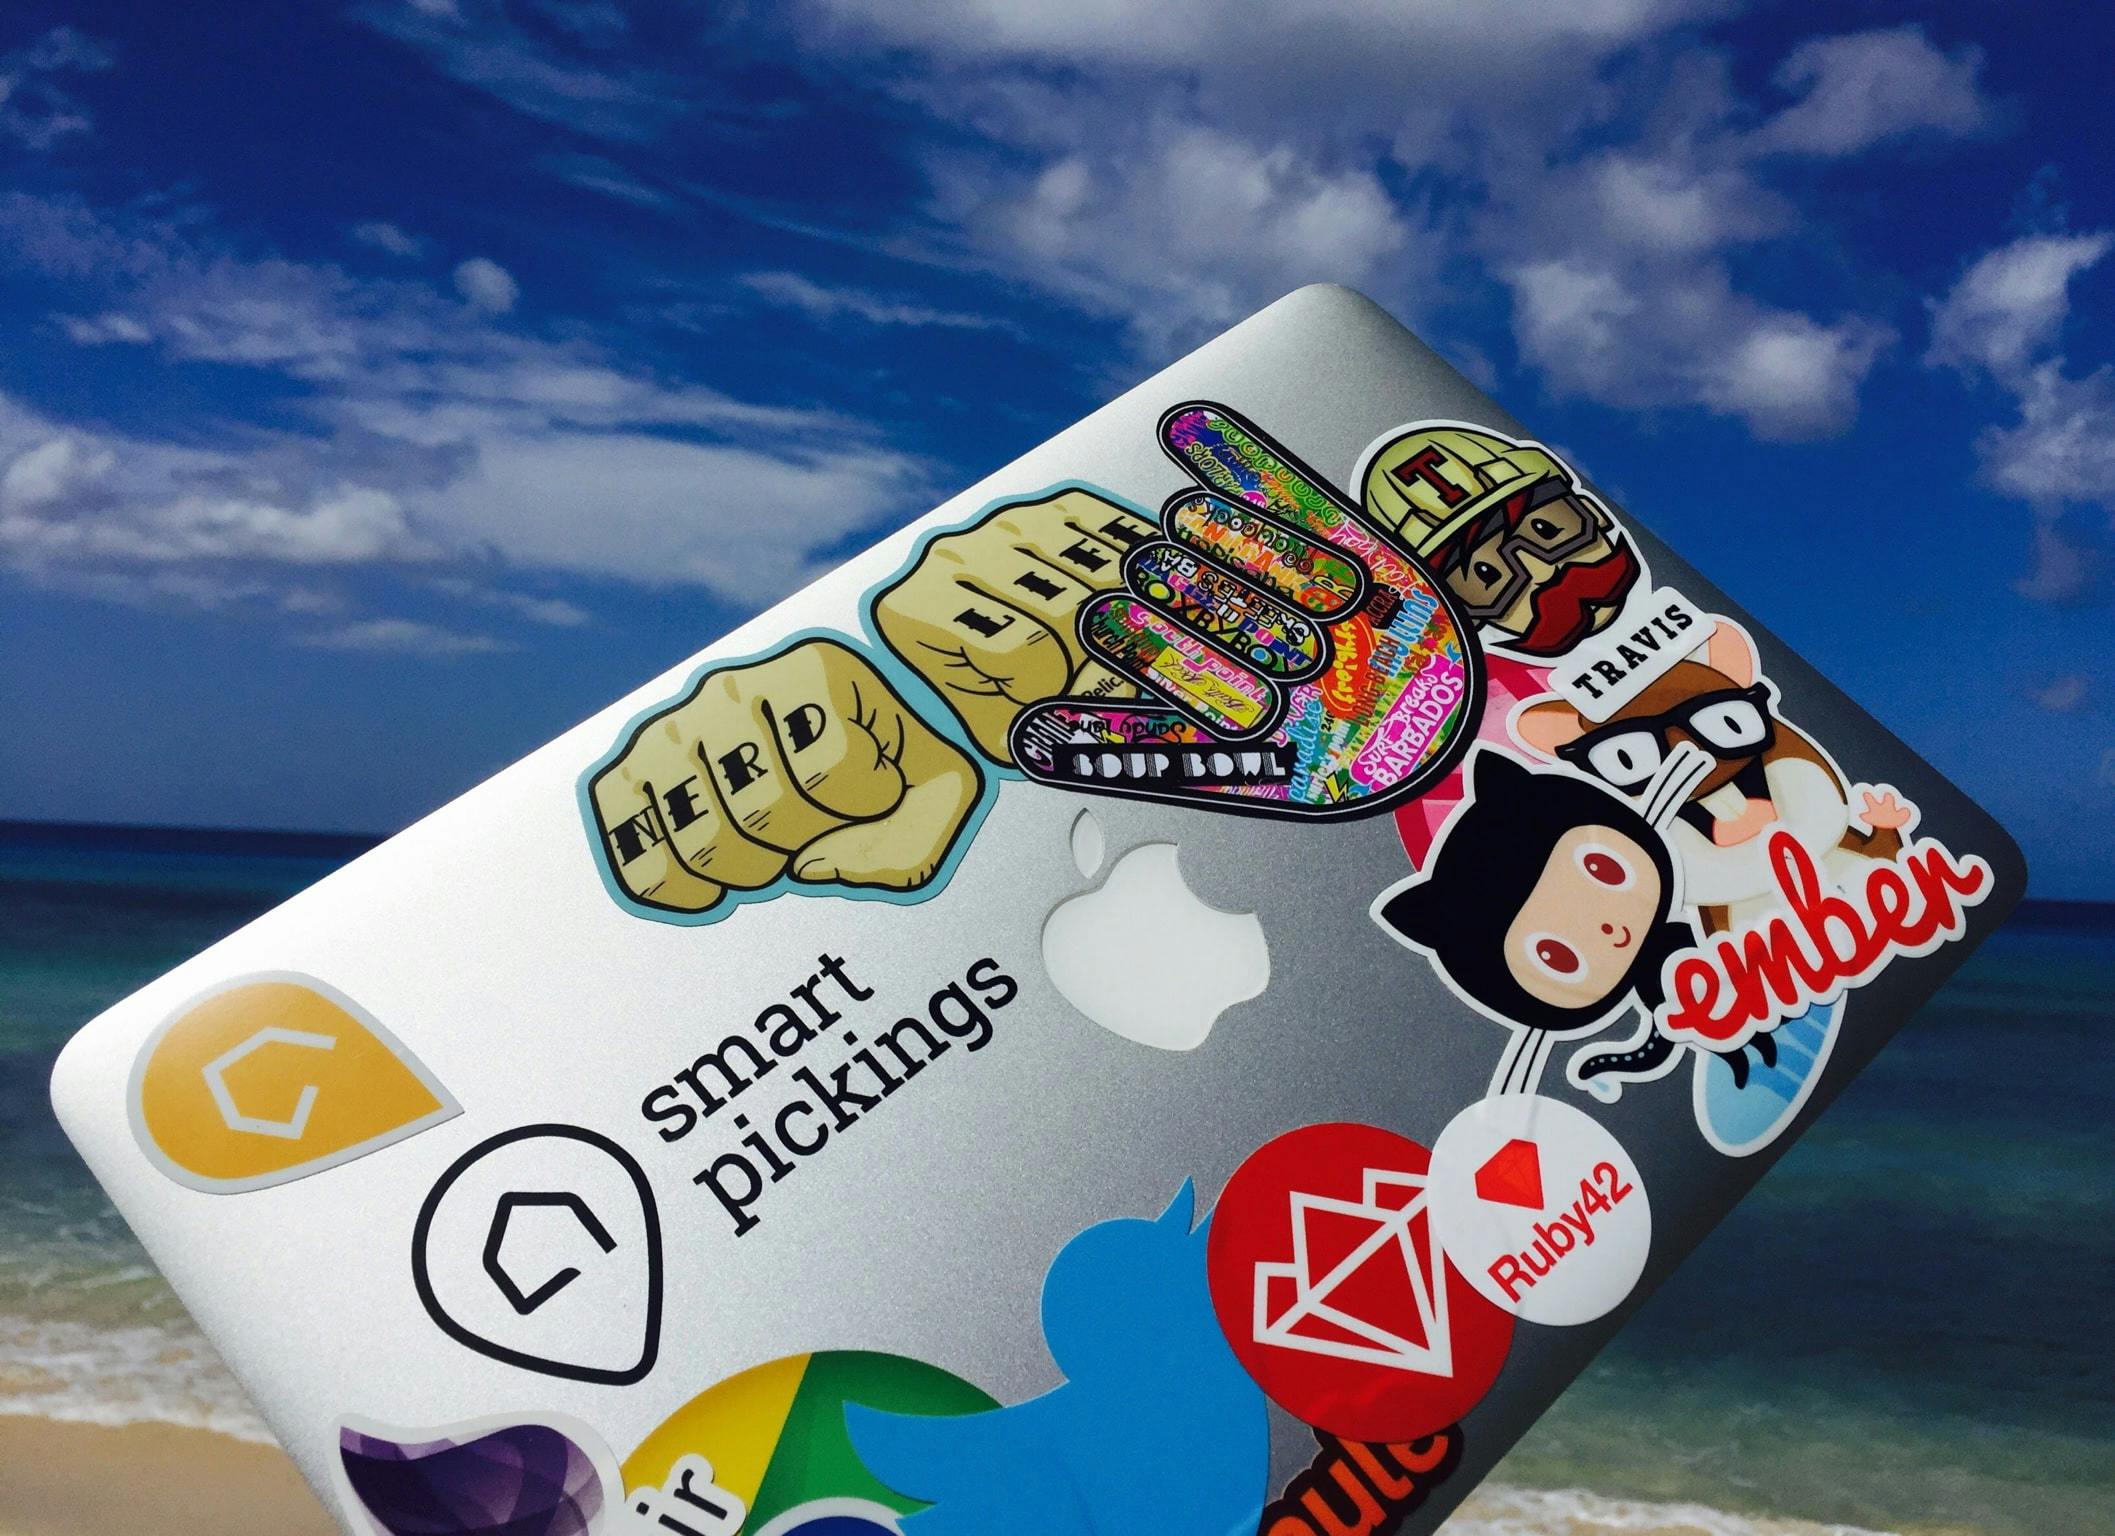 Macbook Air with Smart Pickings Sticker